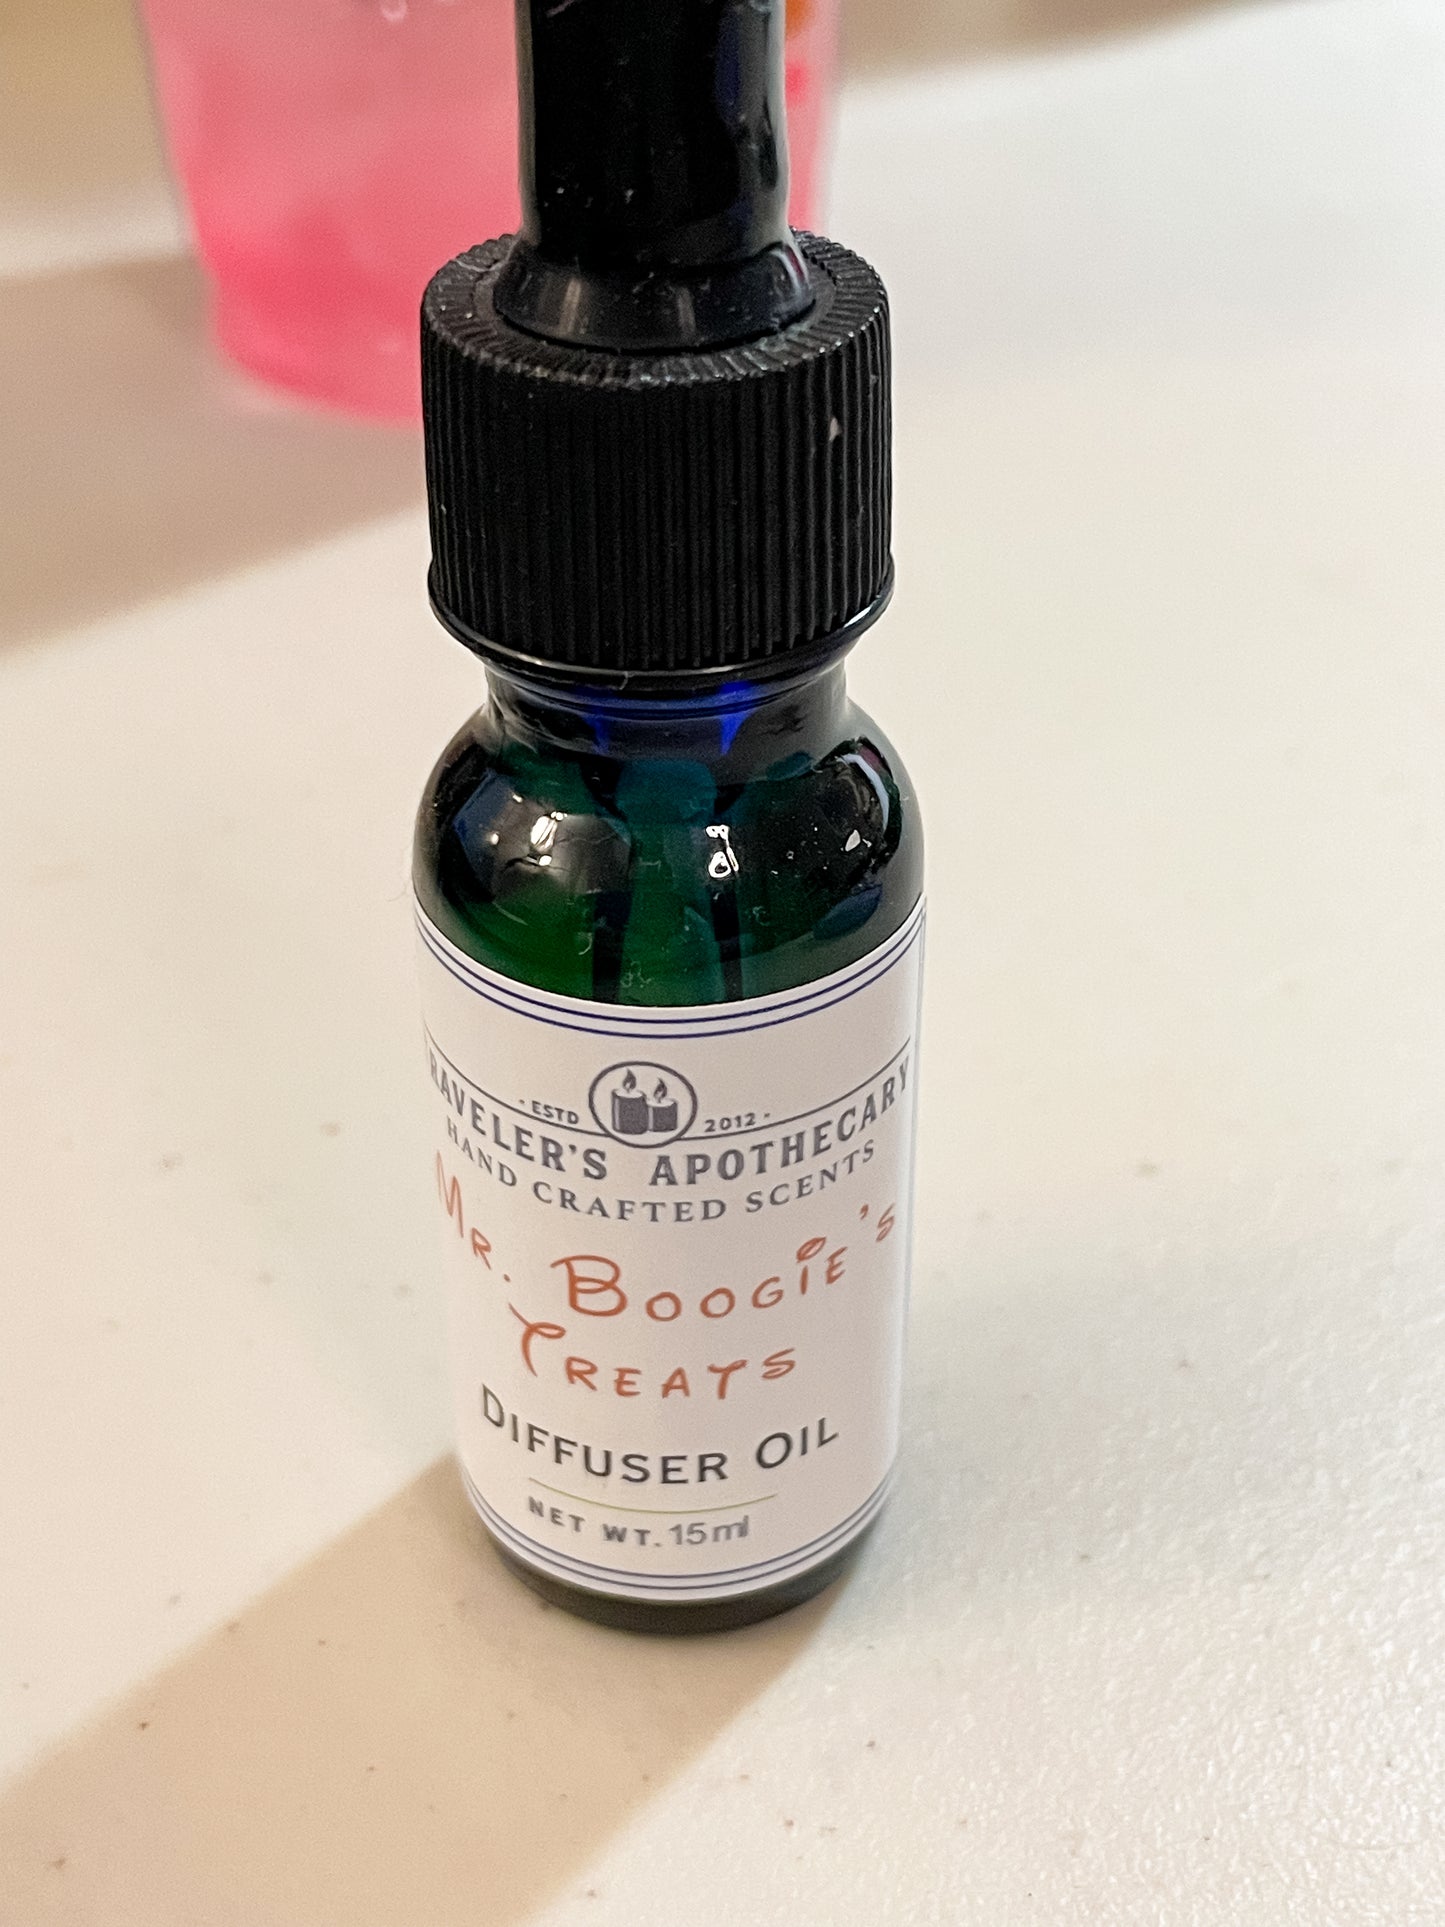 Traveler's Apothecary - Mr. Boogie's Treats Diffuser Oil